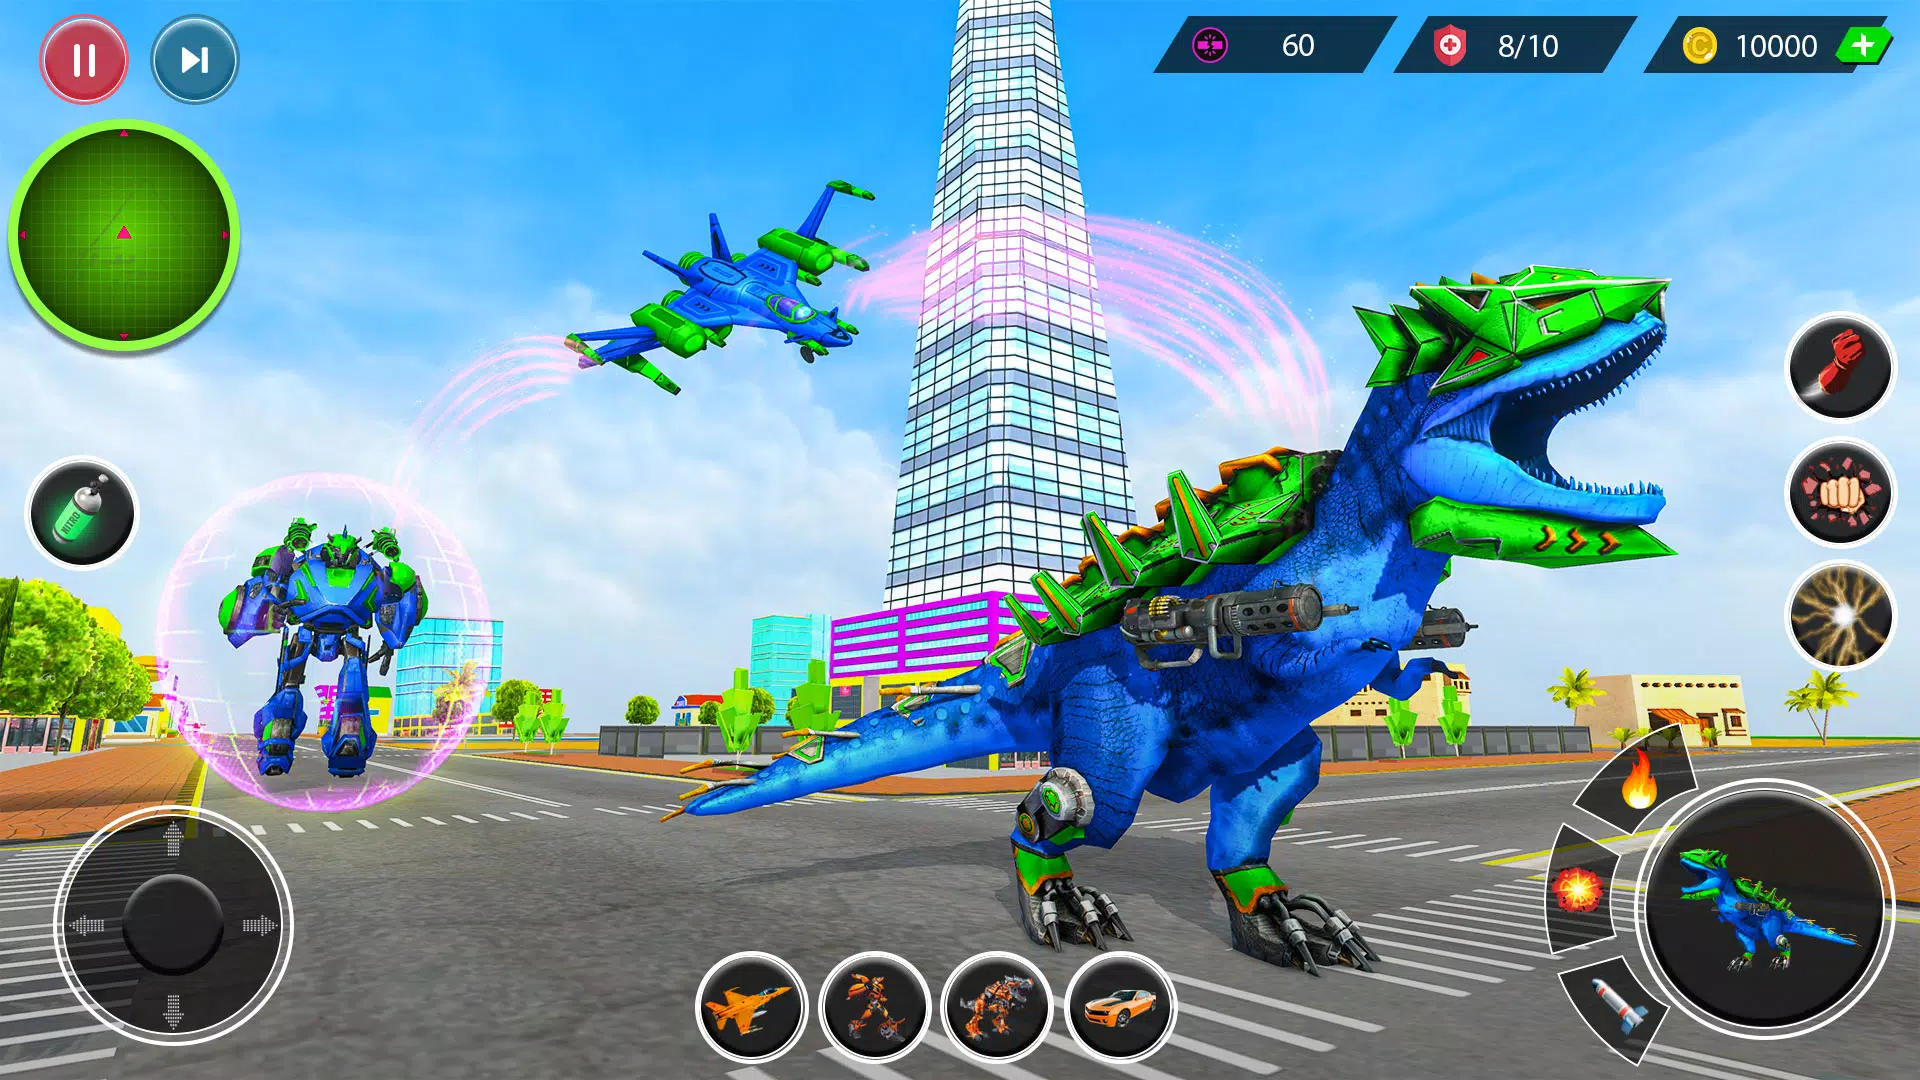 Robot Dino T-Rex Attack 2.8 APK + Mod [Unlocked][Invincible] for Android.